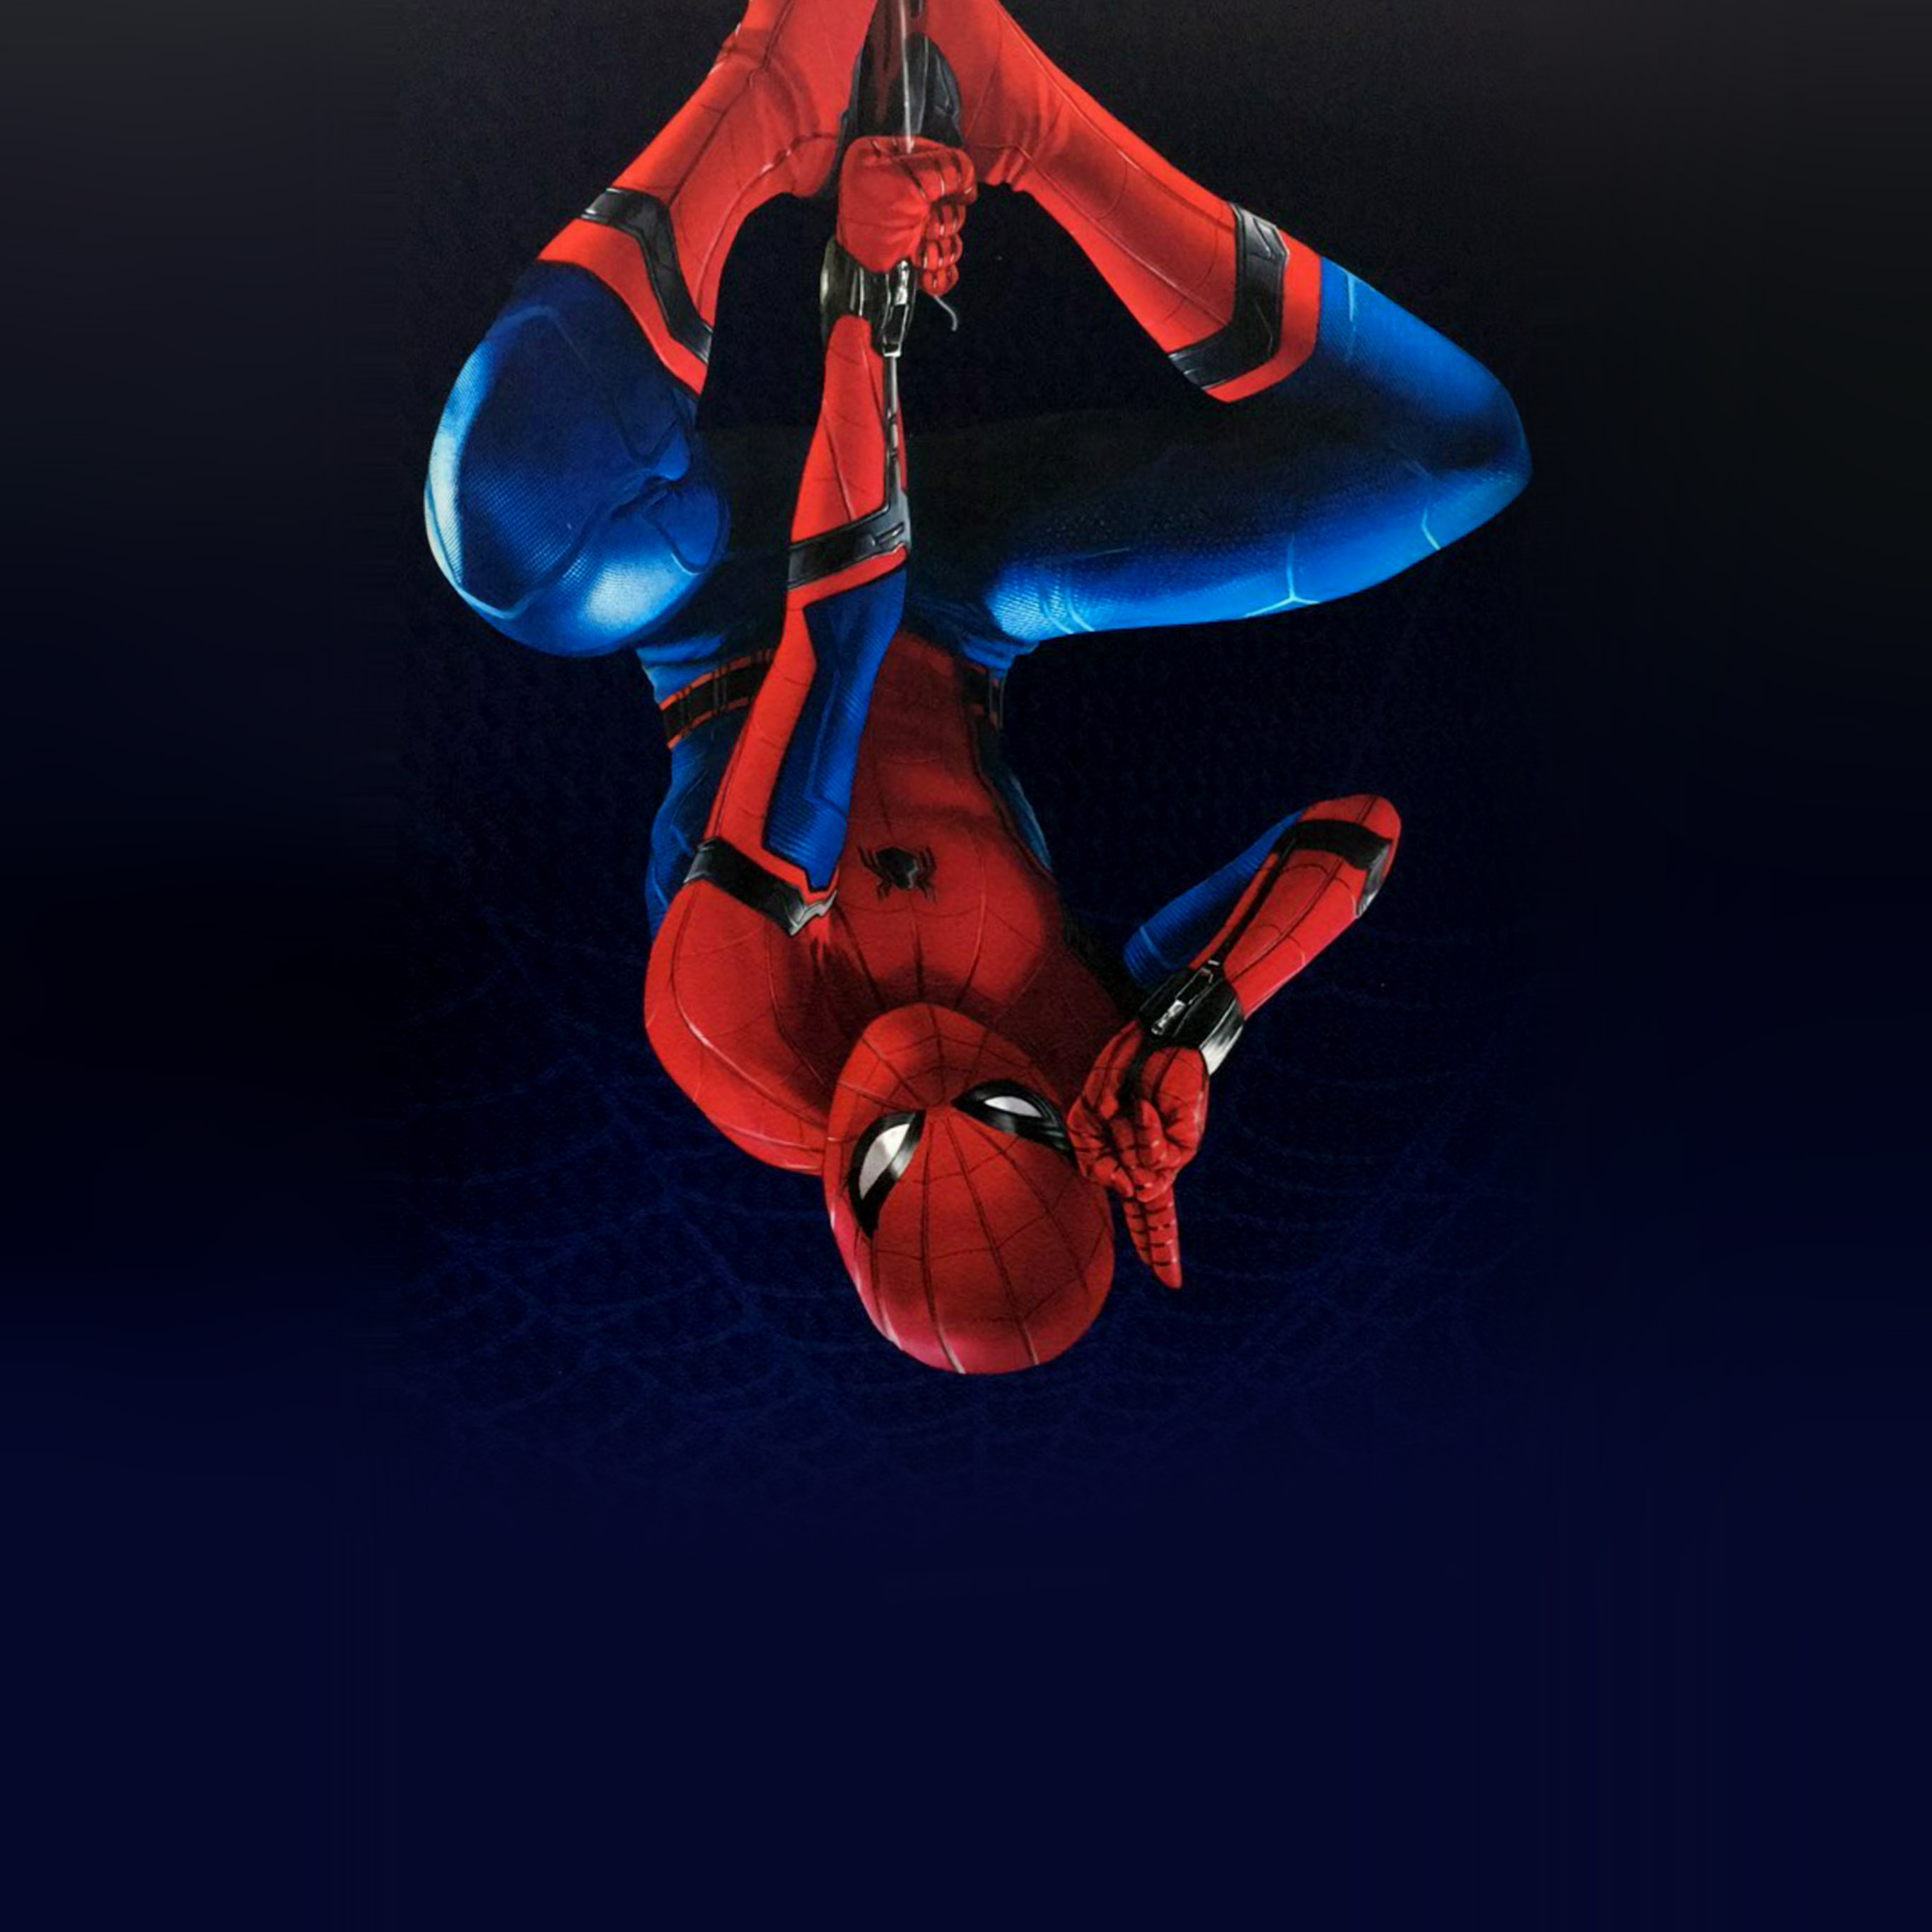 Ipad Pro - Spider Man Homecoming Hd , HD Wallpaper & Backgrounds